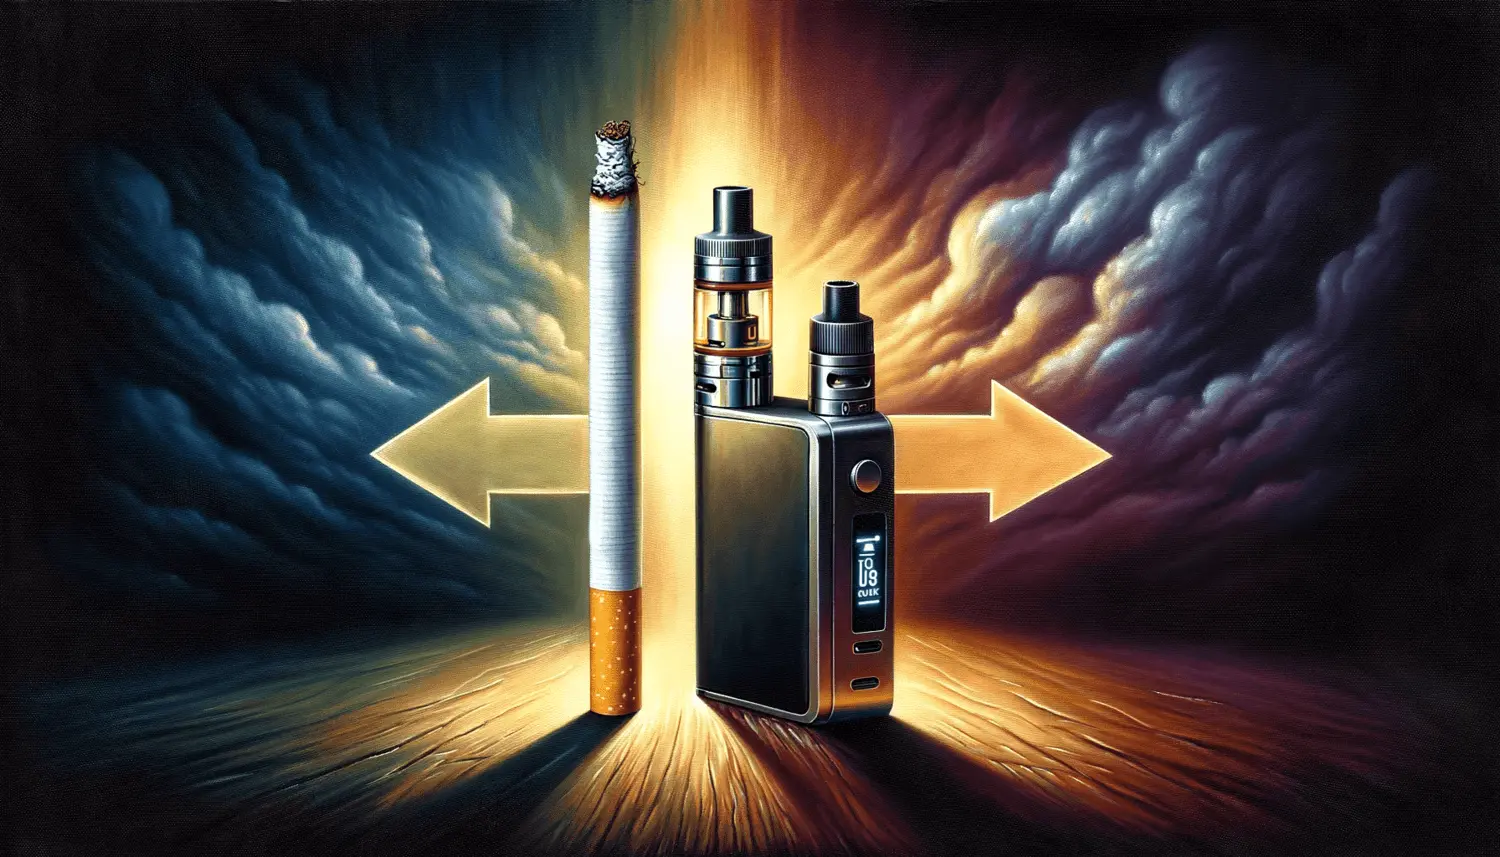 A traditional cigarette, a vape device and bottle of e-liquid side-by-side